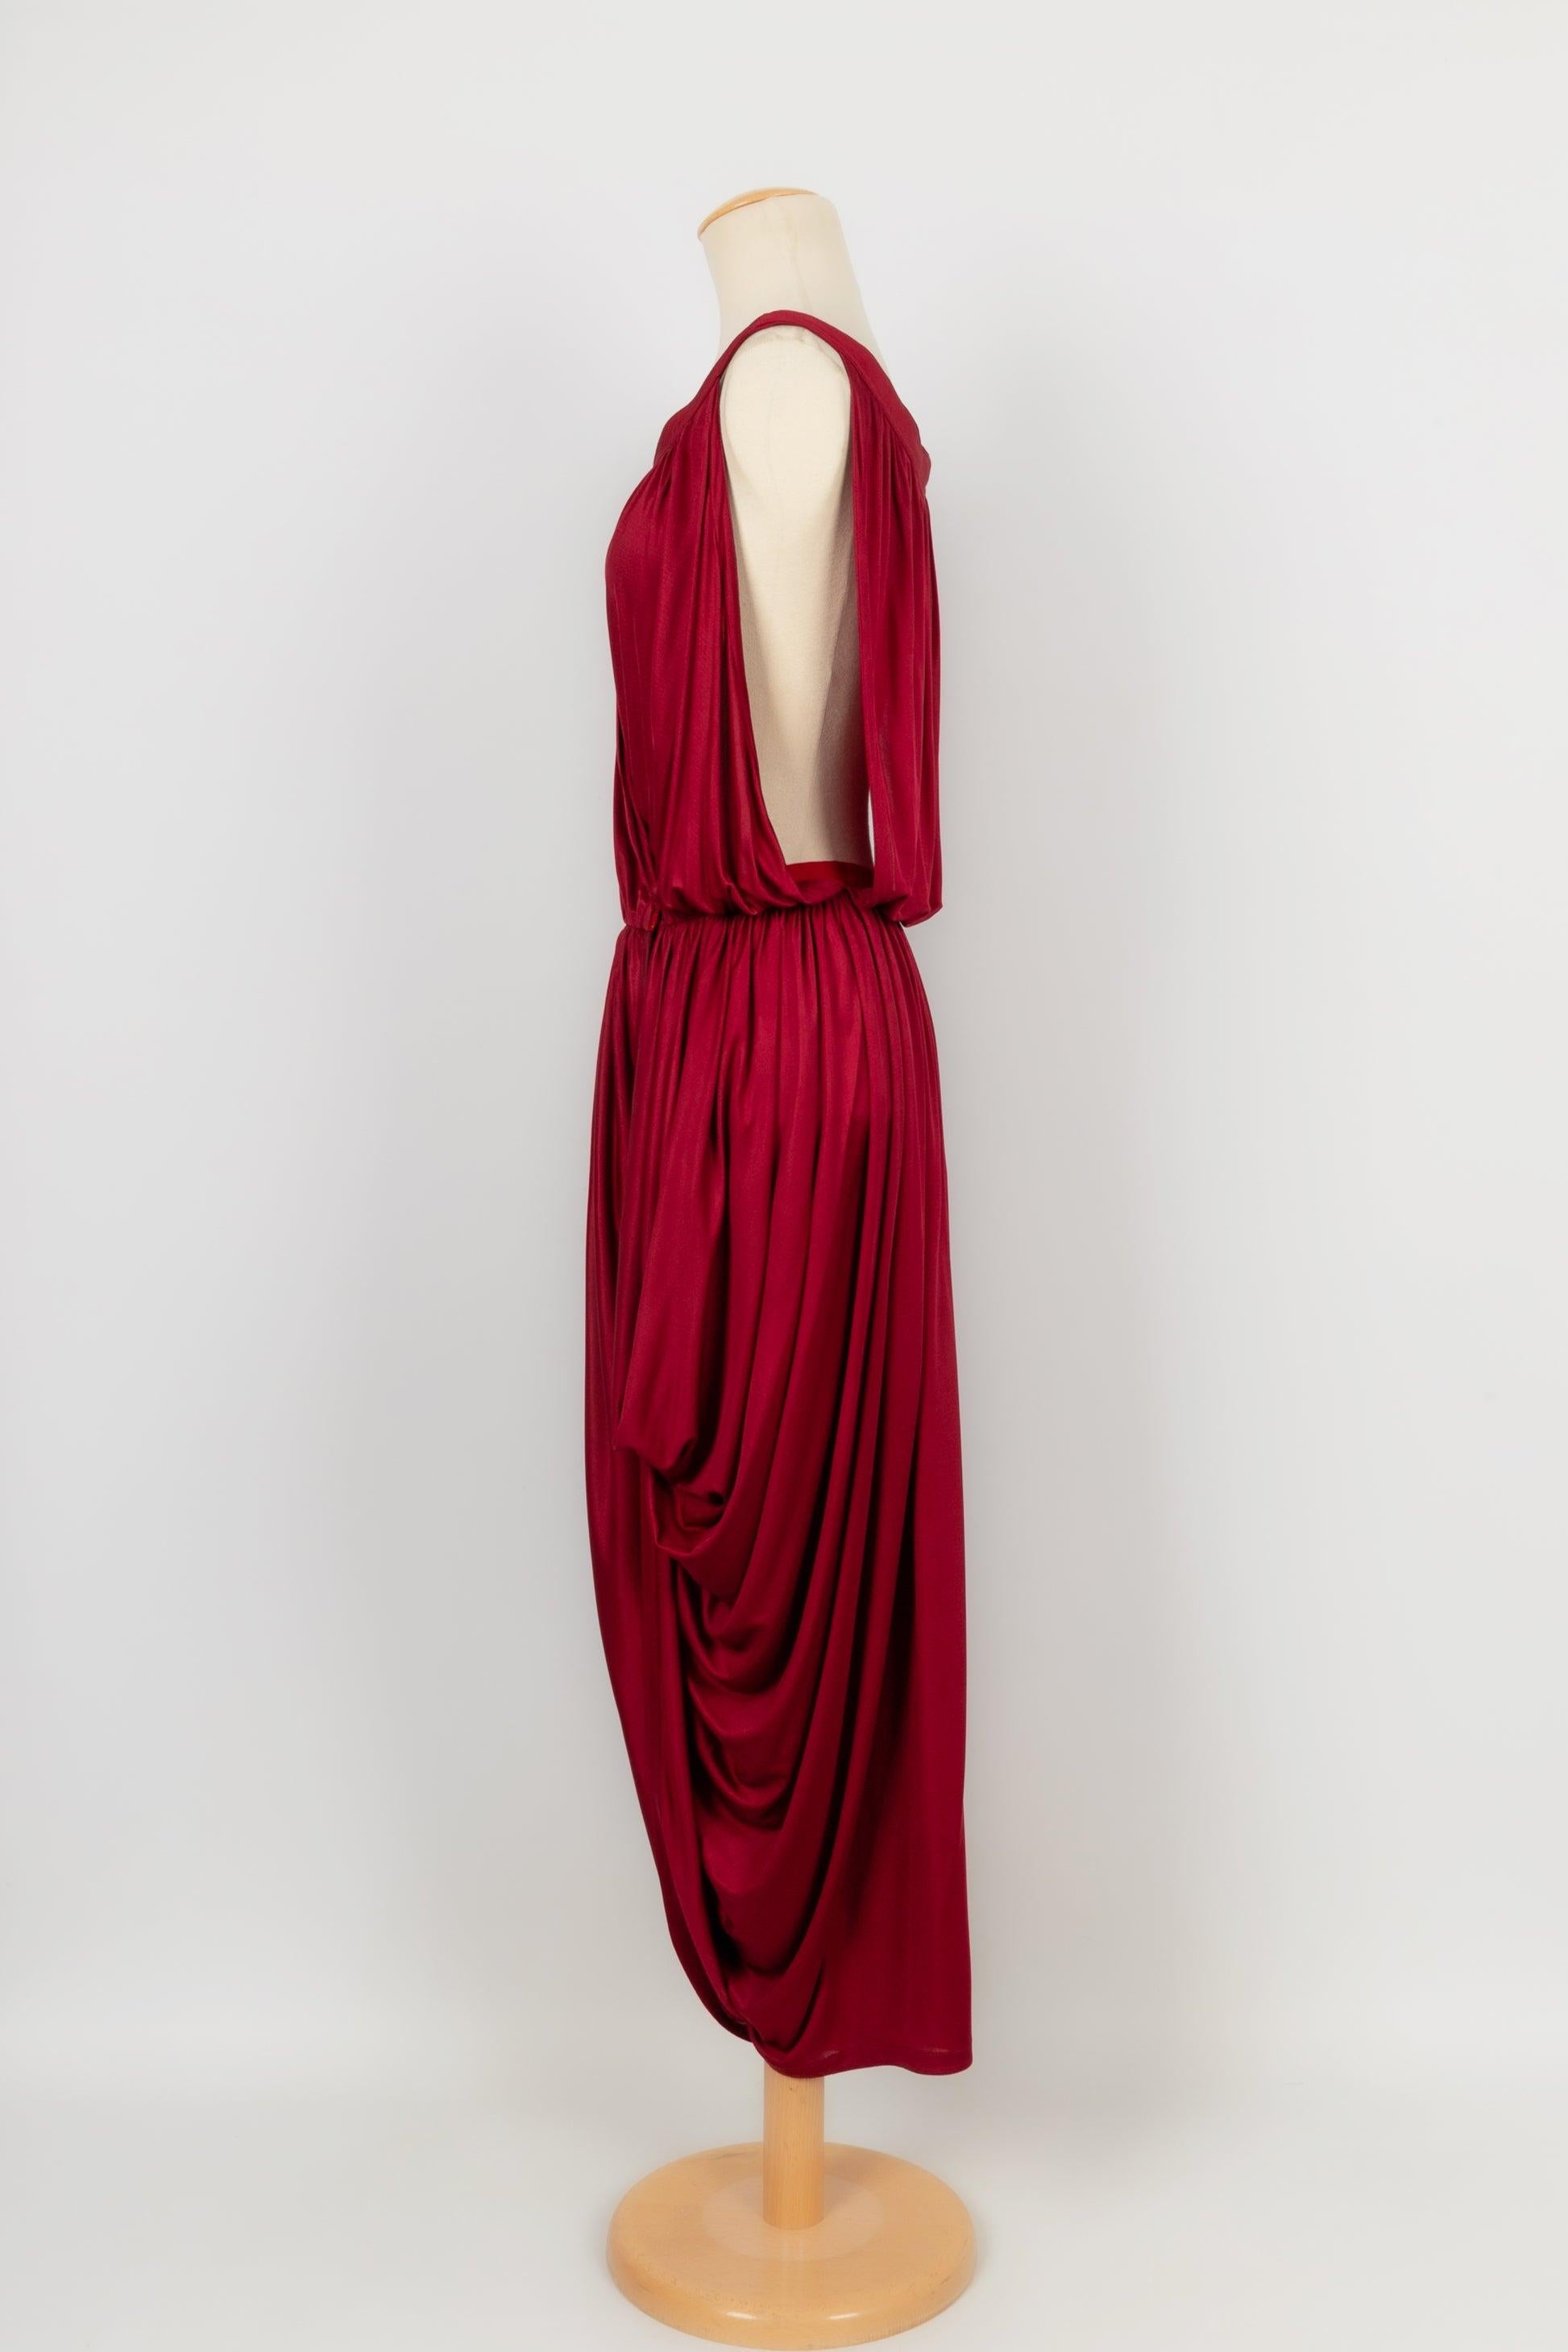 Versace - (Made in Italy) Silk pleated dress. Indicated size 44IT, it fits a 42FR. Circa 1980 Collection.

Additional information:
Condition: Very good condition
Dimensions: Waist: 34 cm
Length: 132 cm

Seller reference: VR287